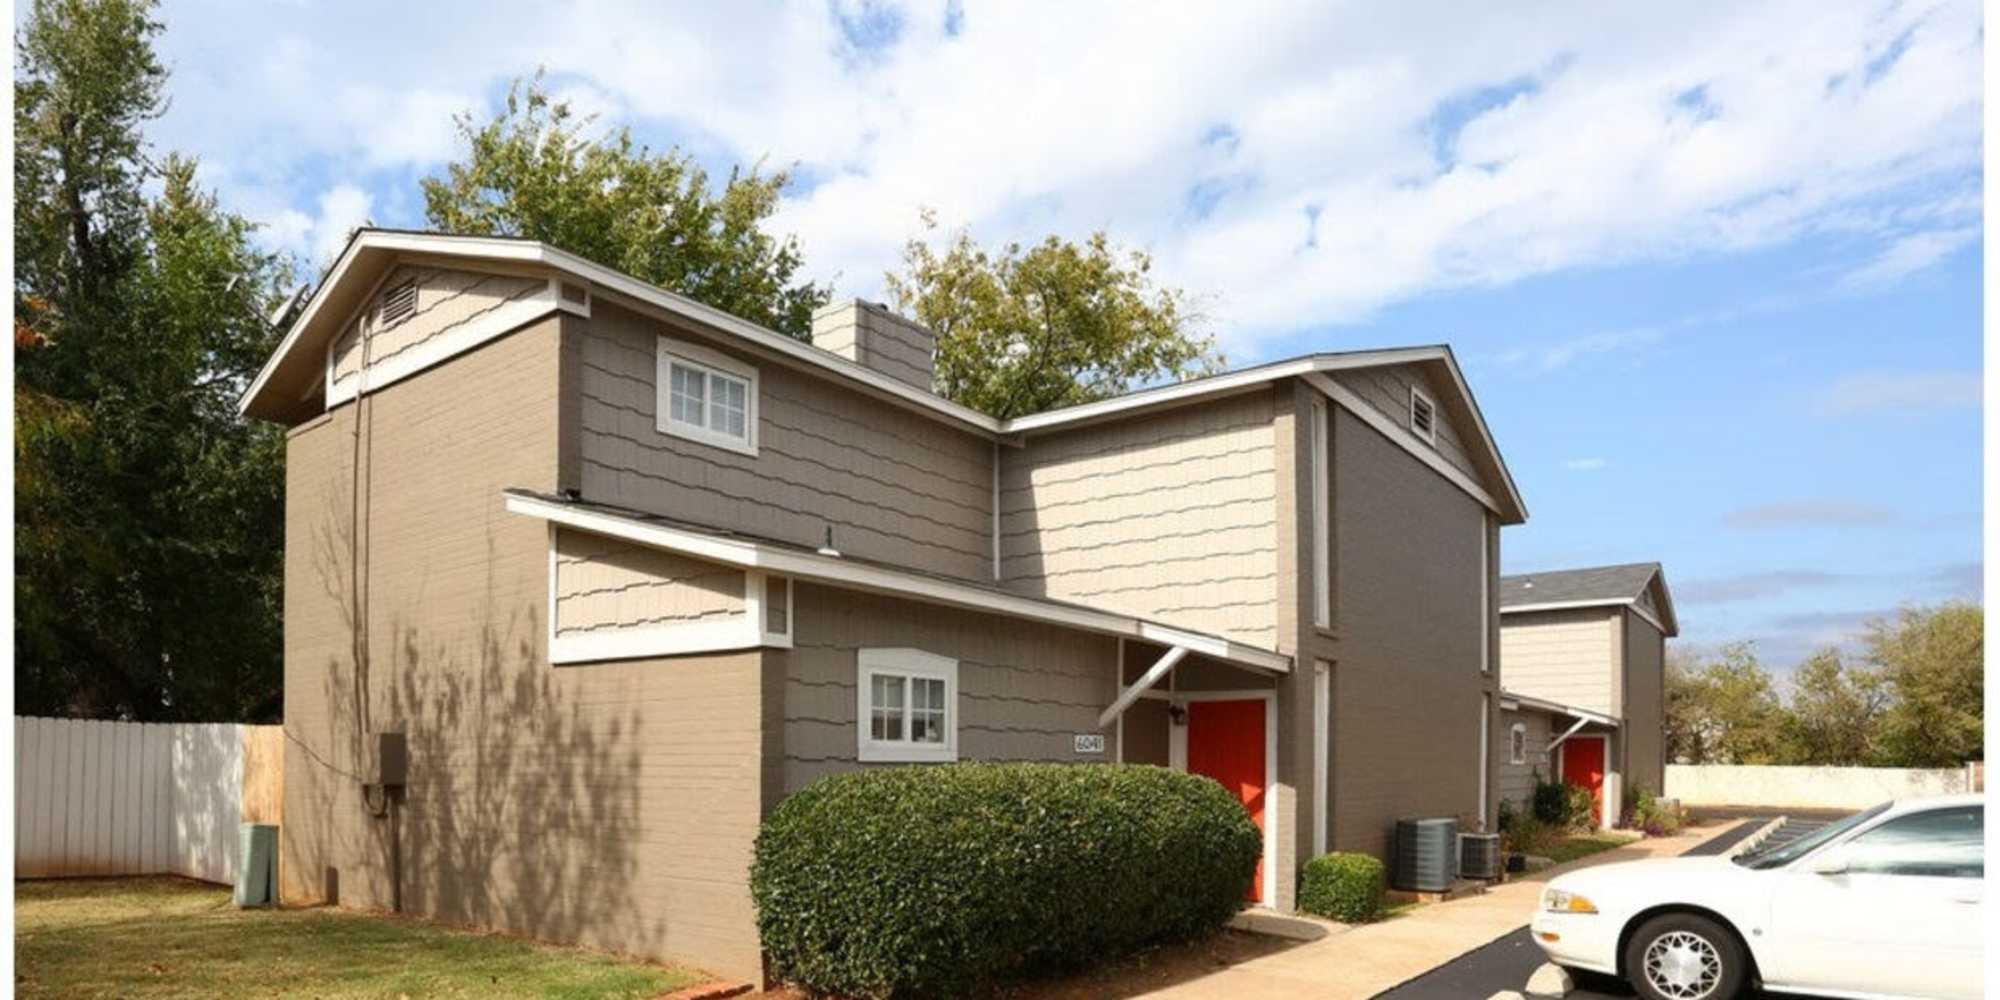 Exterior view of Solare Apartment Homes in Warr Acres, Oklahoma